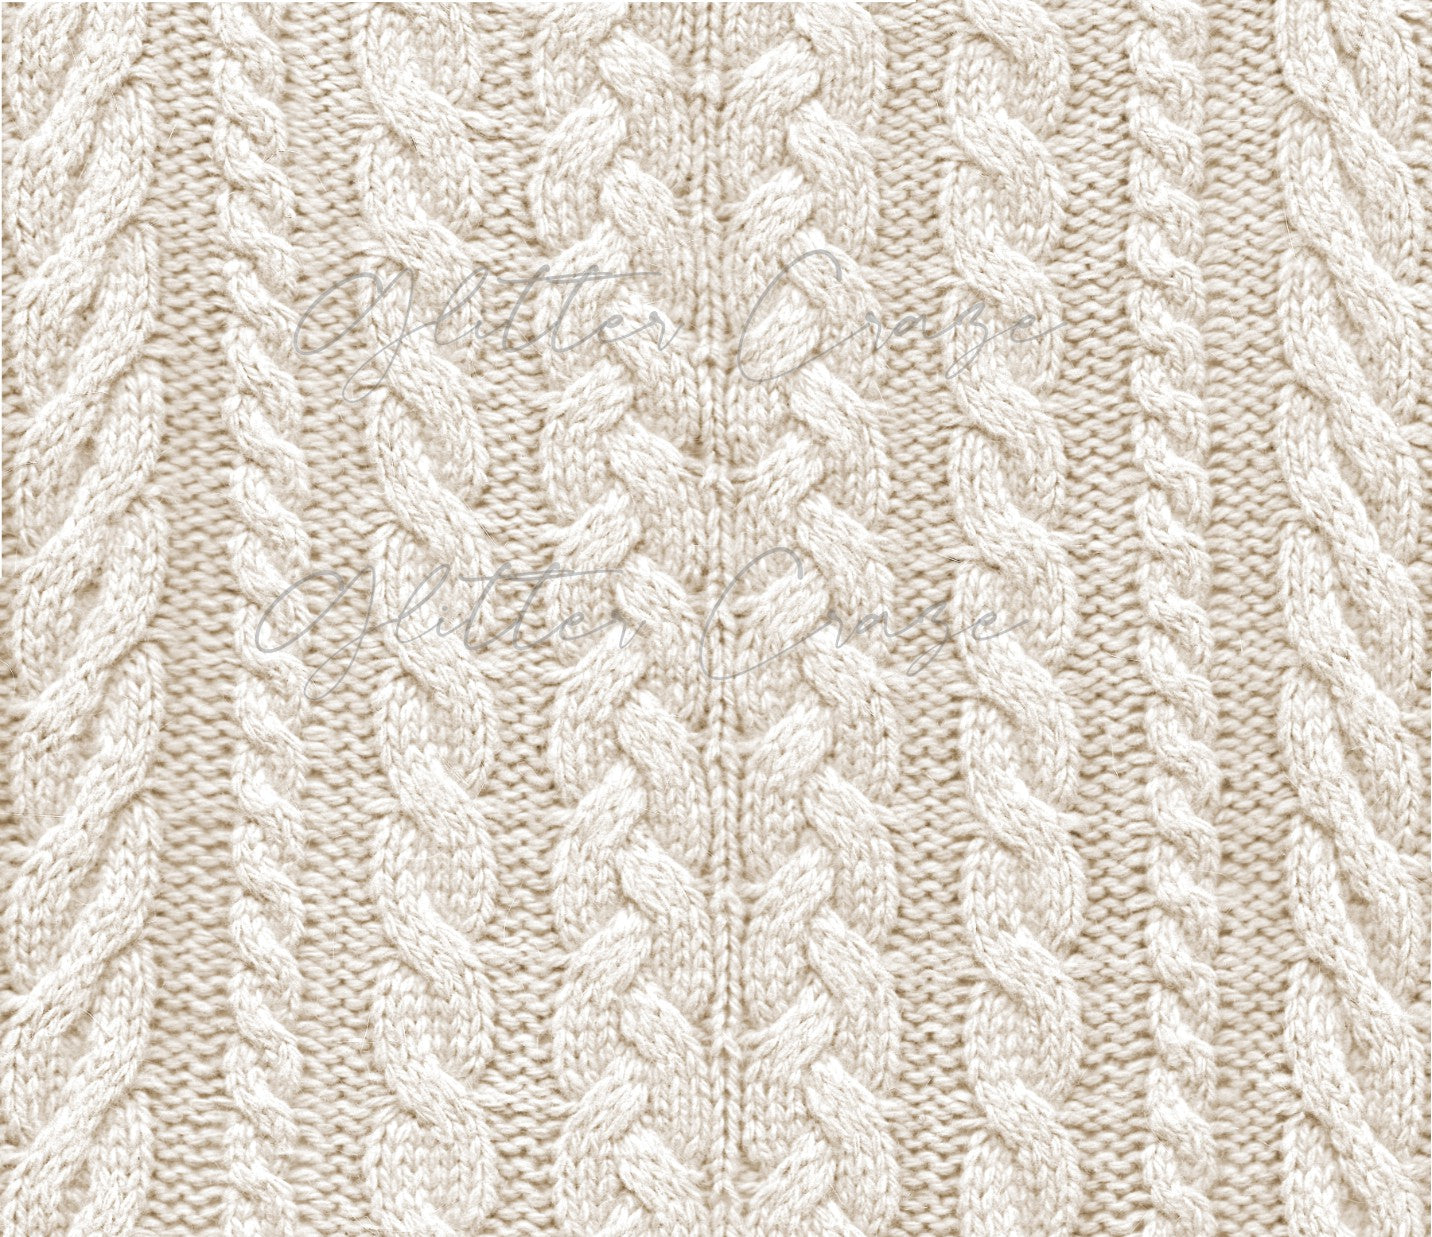 Cable Knit Sweater Adhesive Vinyl